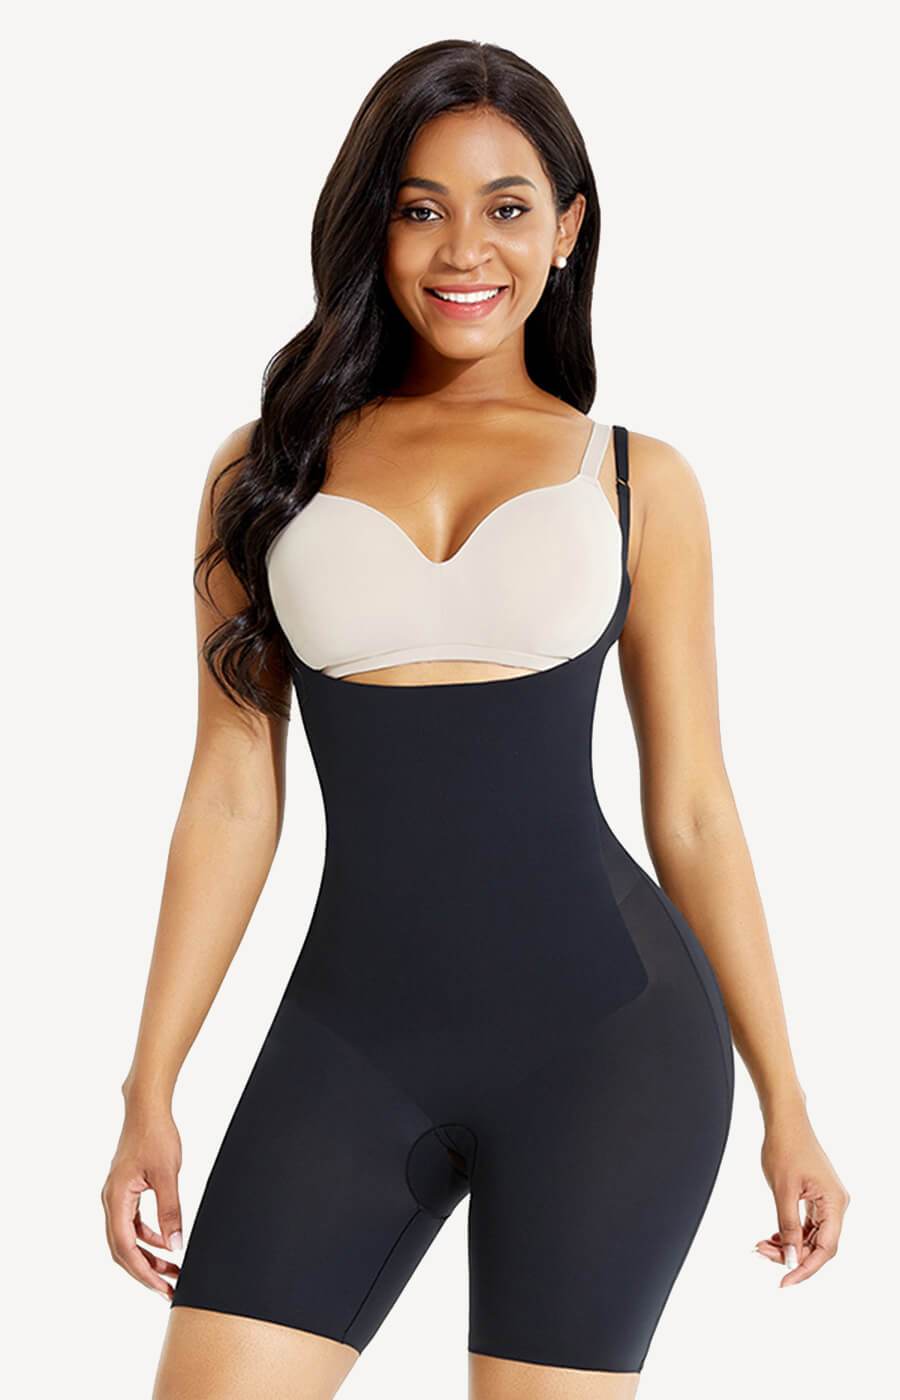 Shapellx AirSlim Seamless Open Bust Panty Bodysuit Review l